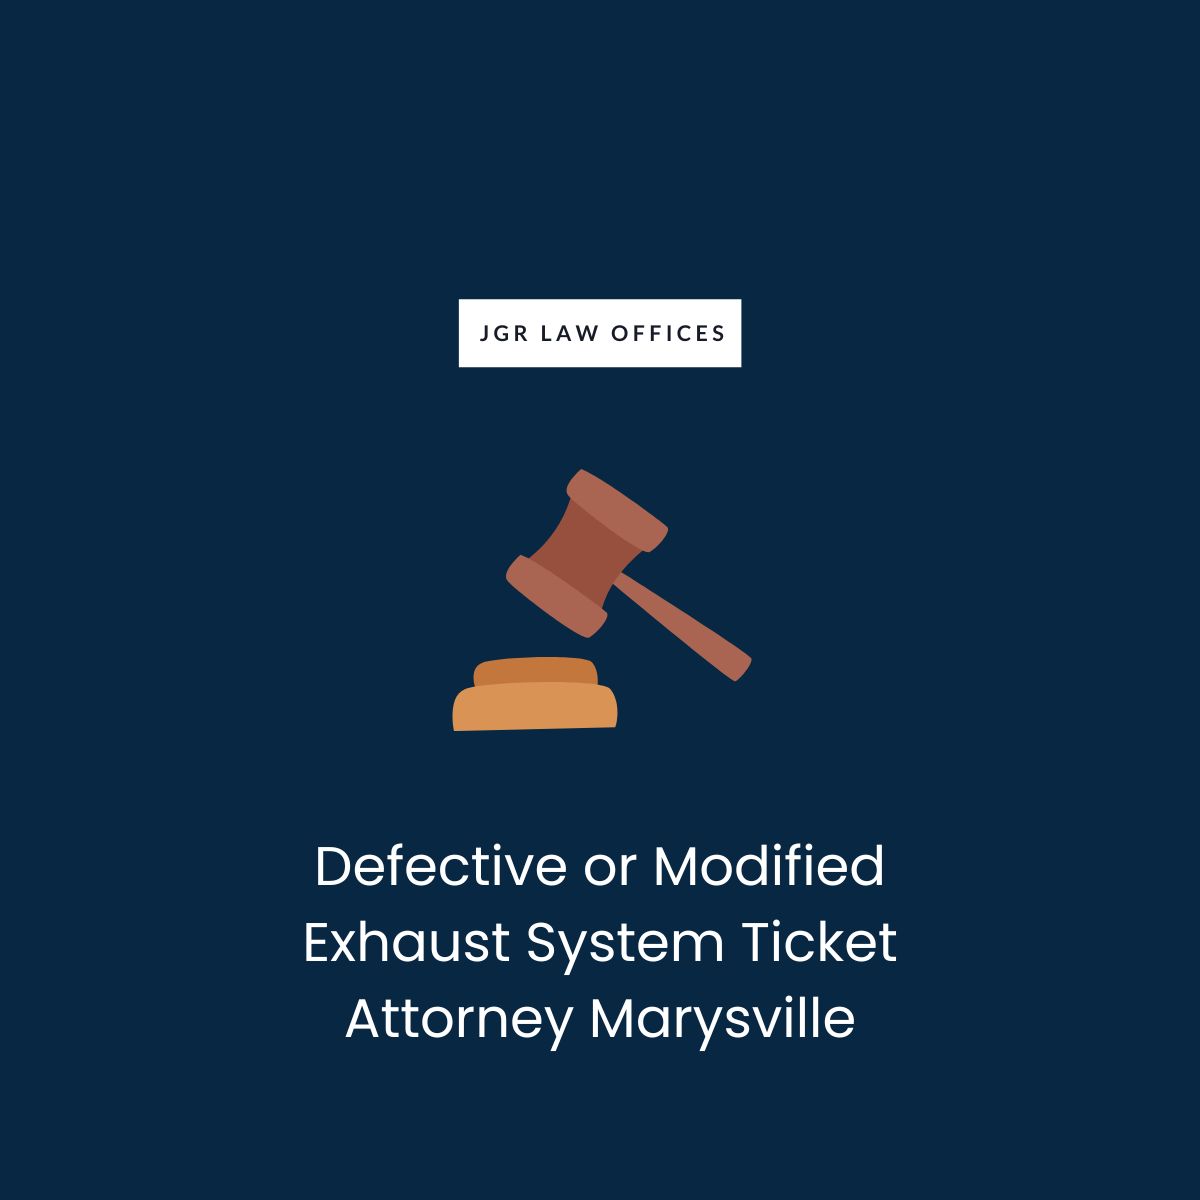 Defective or Modified Exhaust System Ticket Attorney Marysville